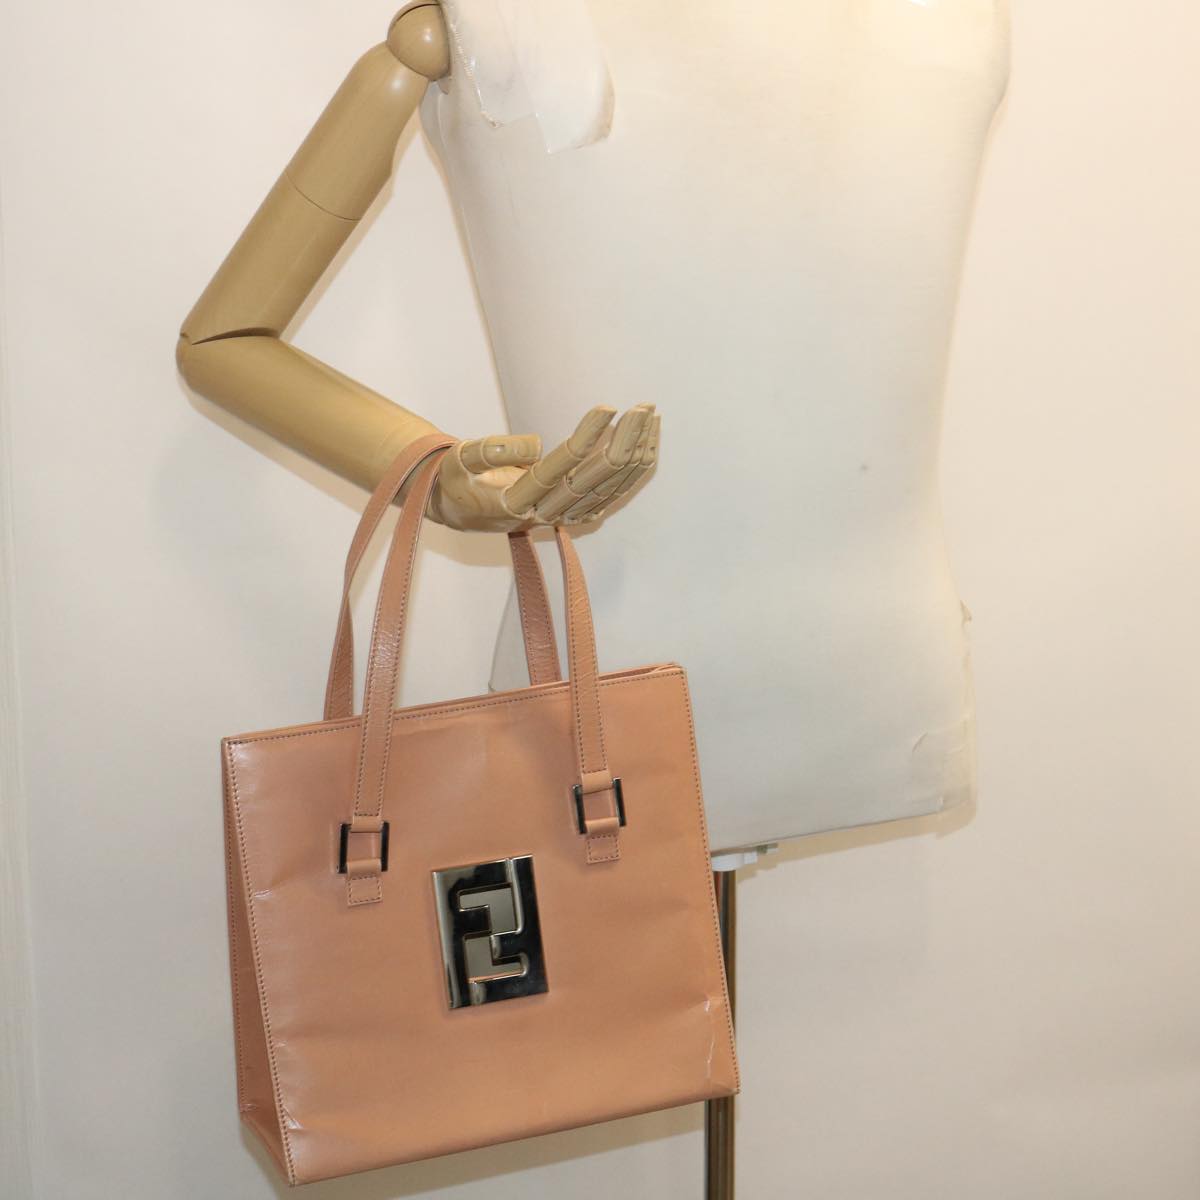 FENDI Tote Bag Leather 2way Pink Auth rd2065